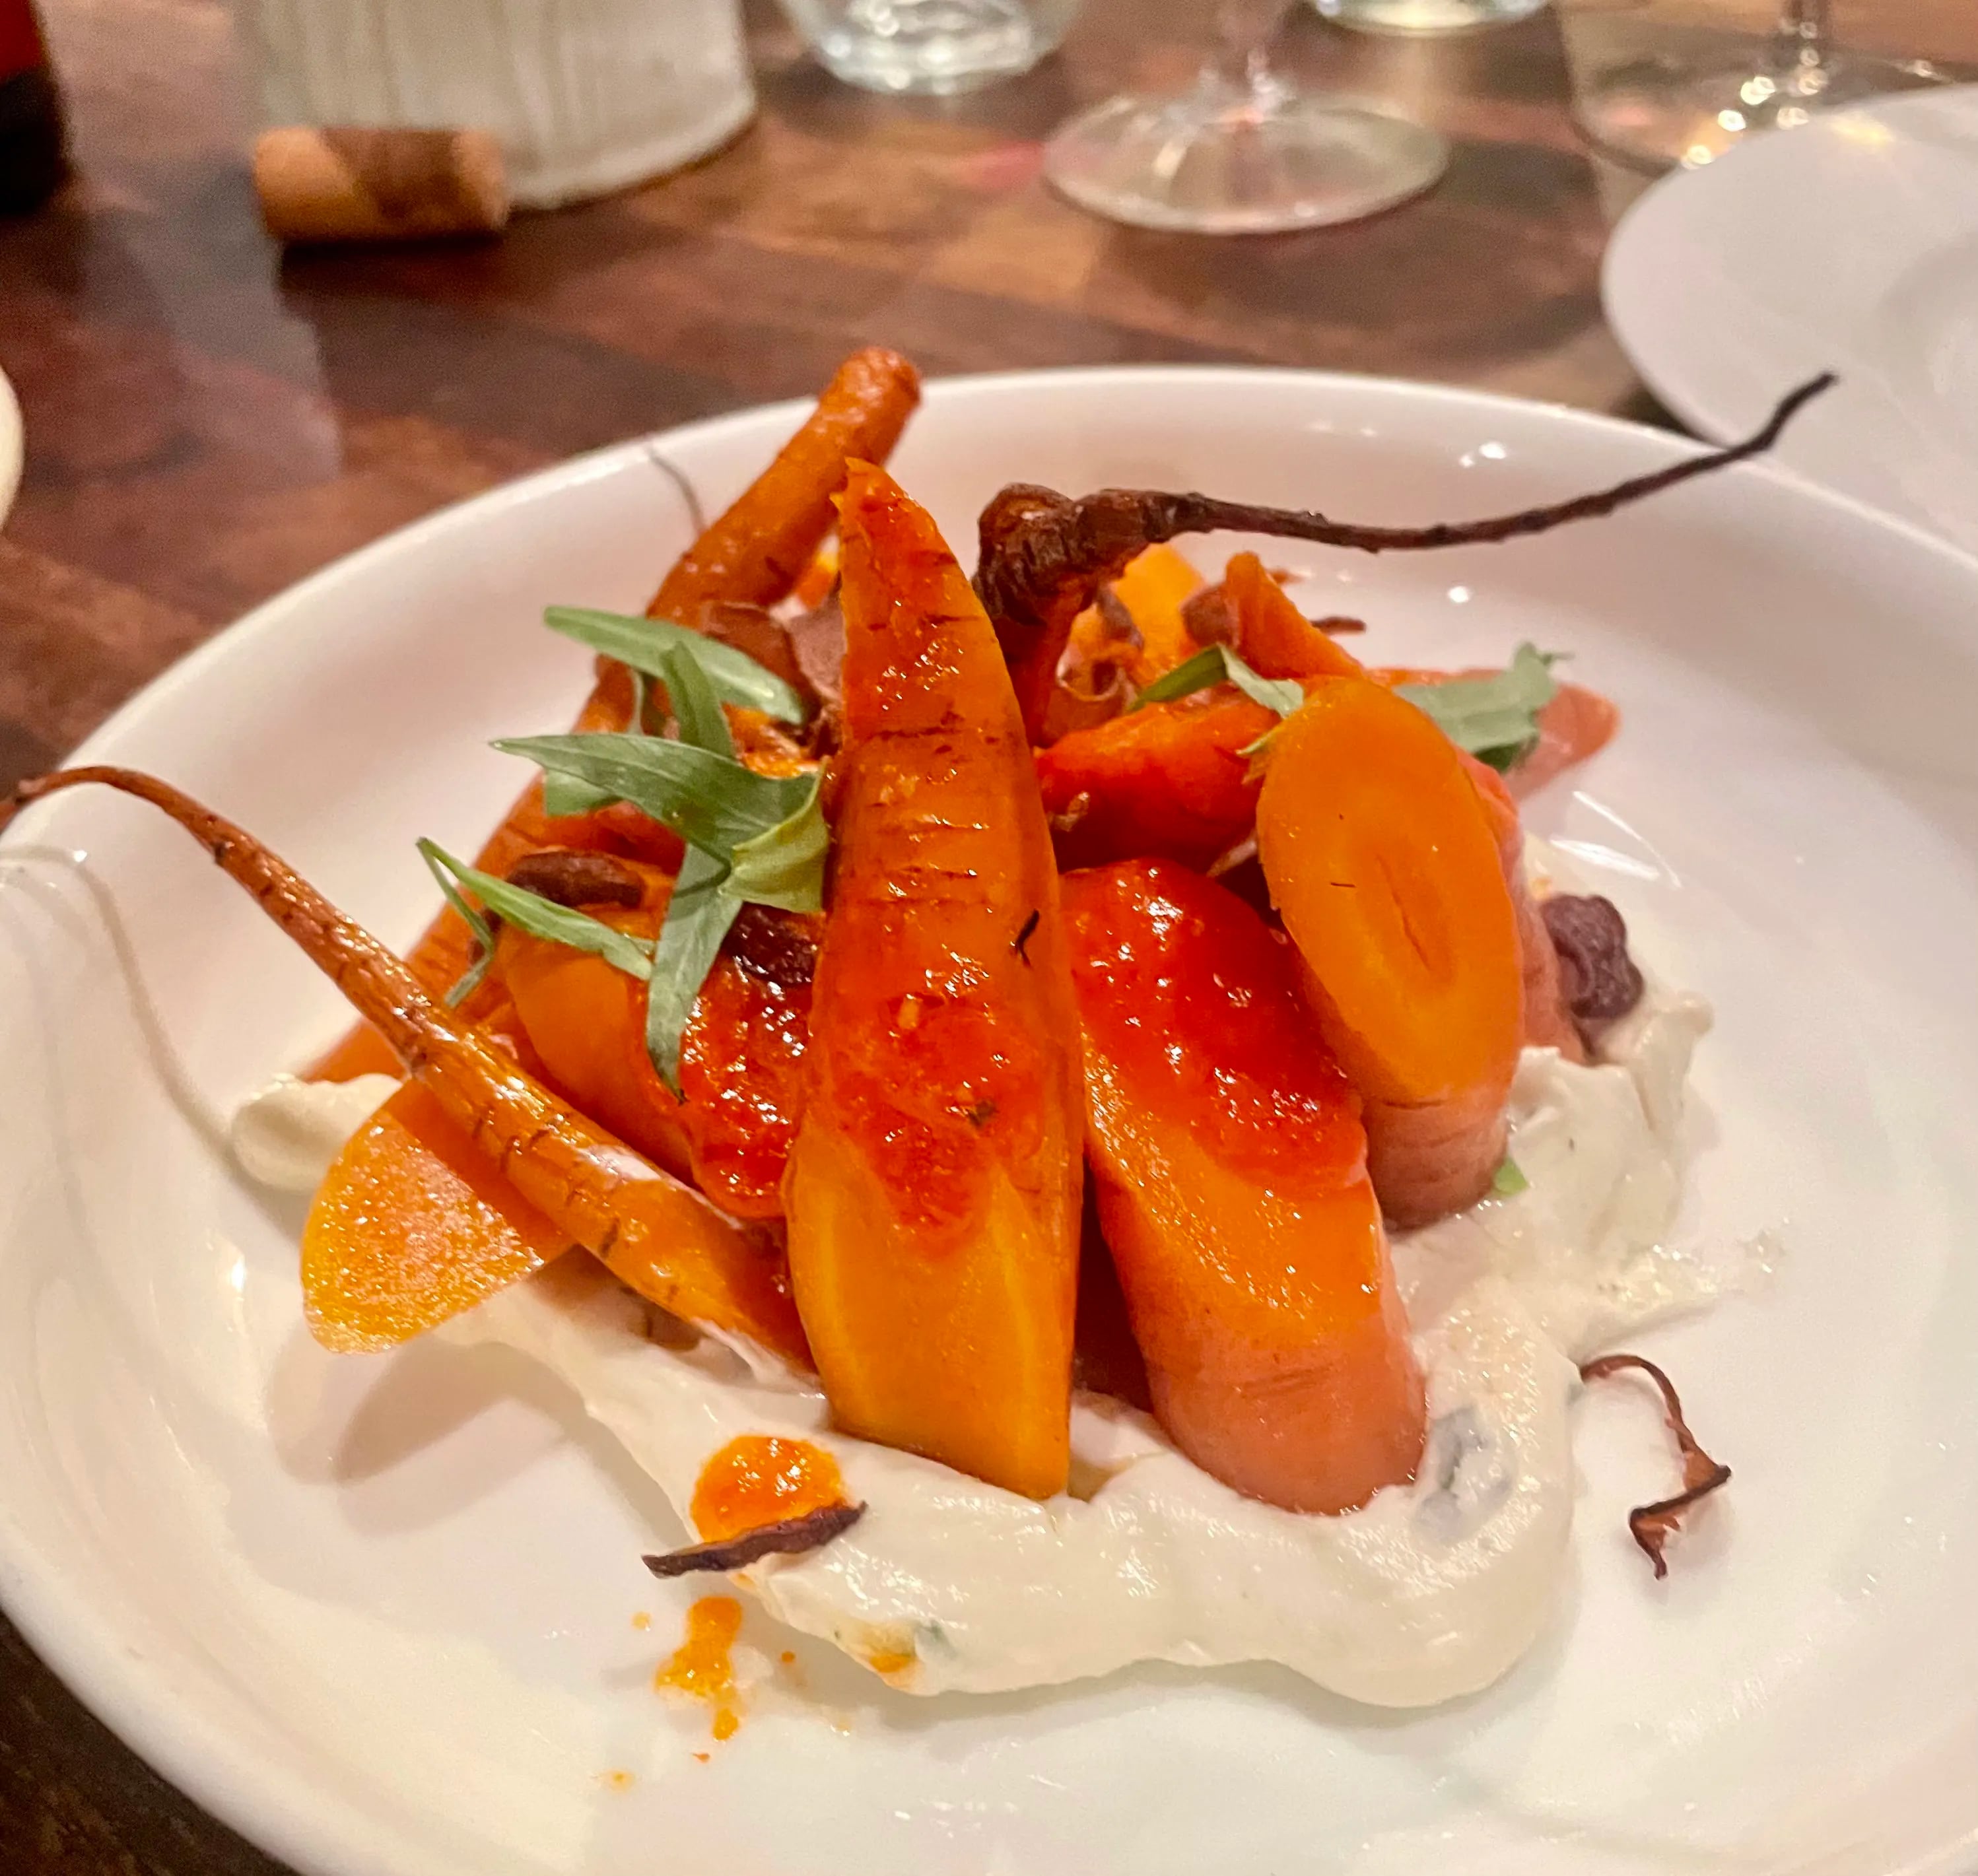 The smoked carrots with chèvre are a signature staple on the ever-changing blackboard menu at Helm BYOB. They are also gluten-free.